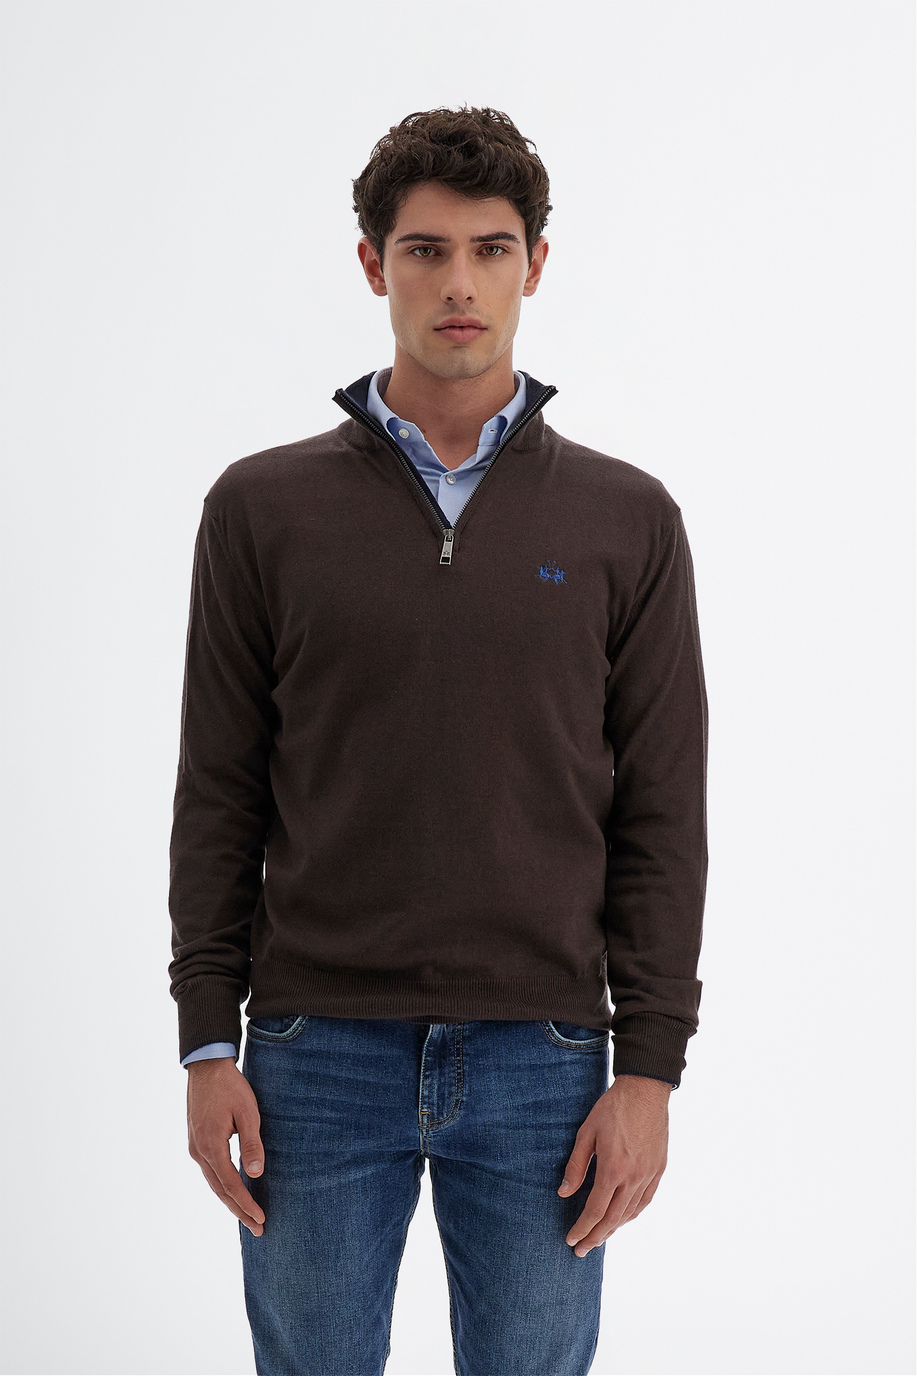 Men’s knitted sweater with long sleeves in cotton and regular fit wool blend with zip neckline - Elegant looks for him | La Martina - Official Online Shop